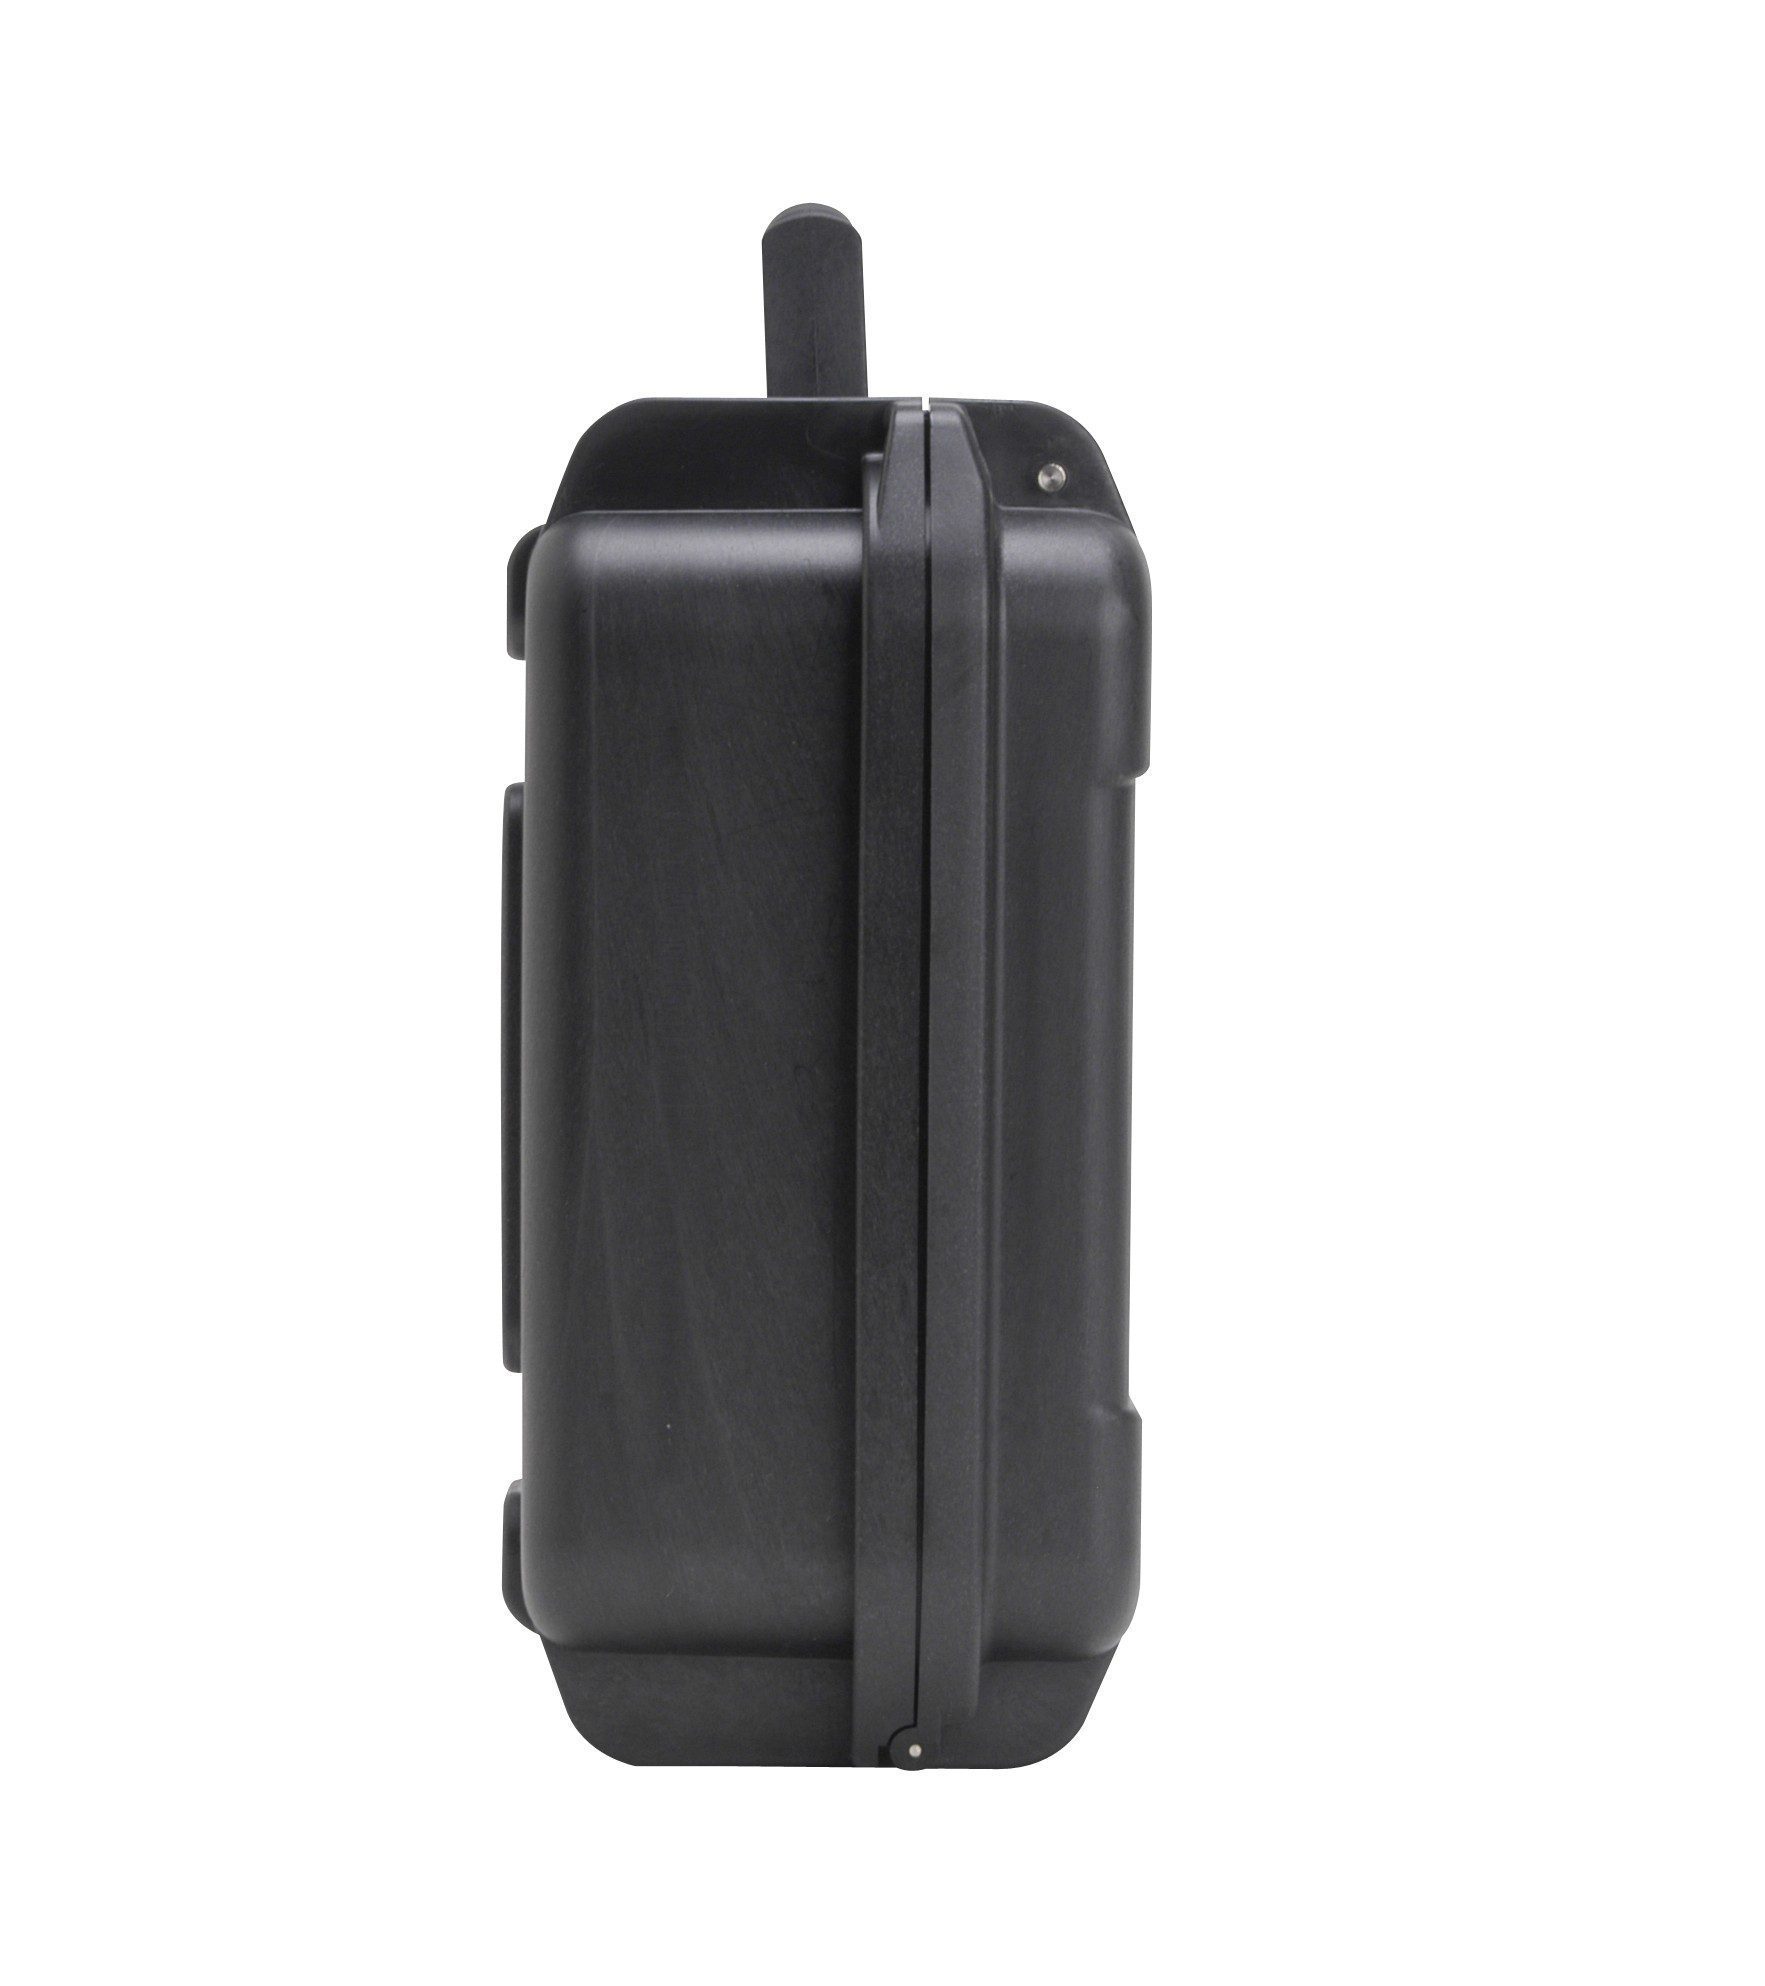 SKB iSeries Valise pour 3 caméra GoPro